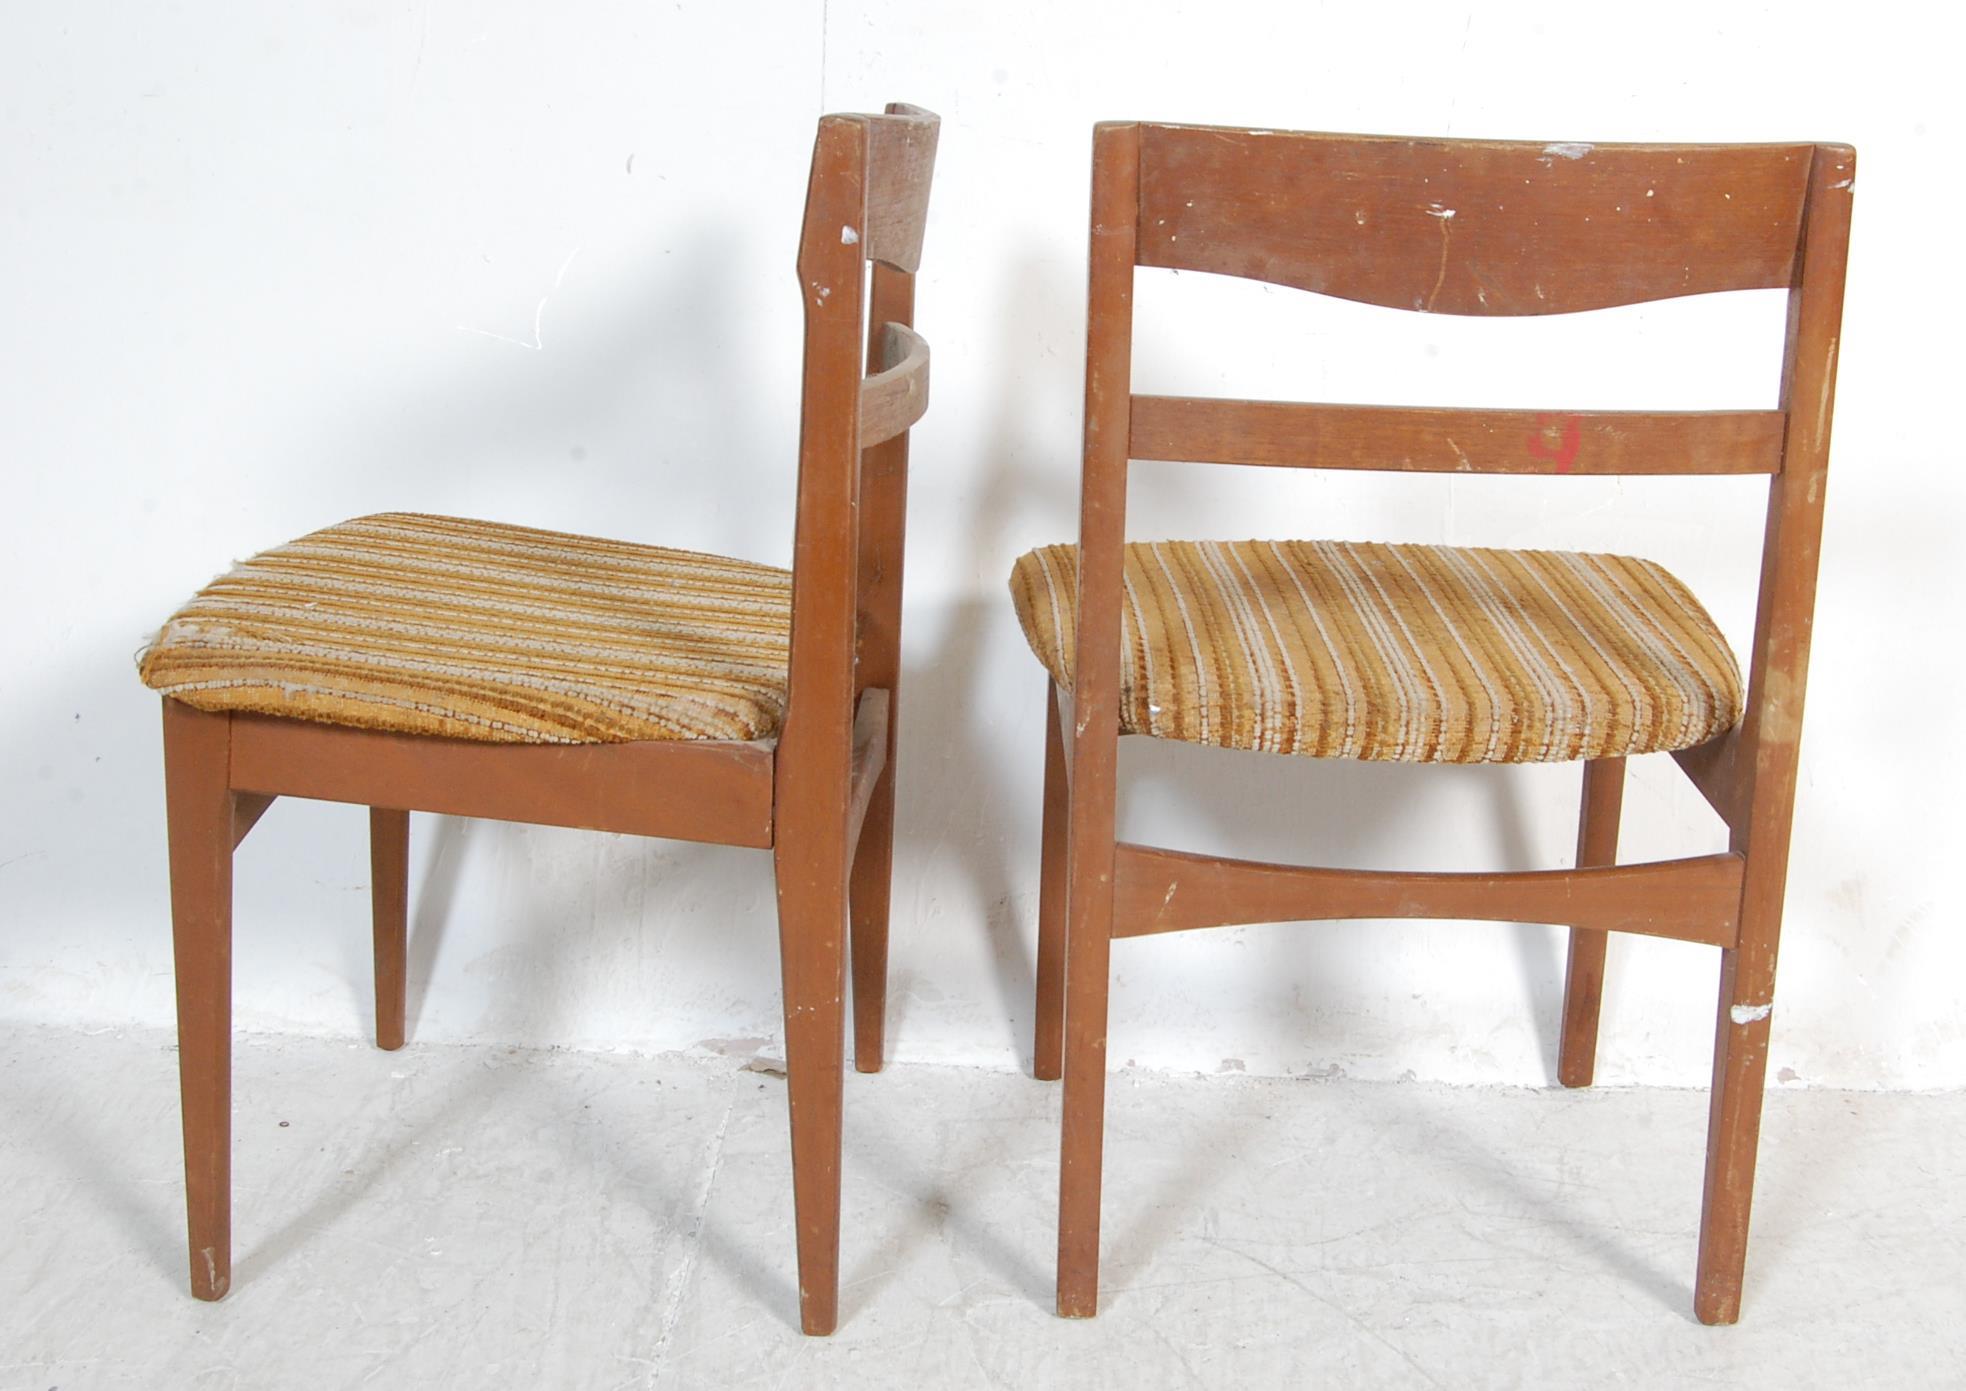 FOUR VINTAGE TEAK WOOD FRAME DINING CHAIRS BY NATHAN - Image 6 of 6